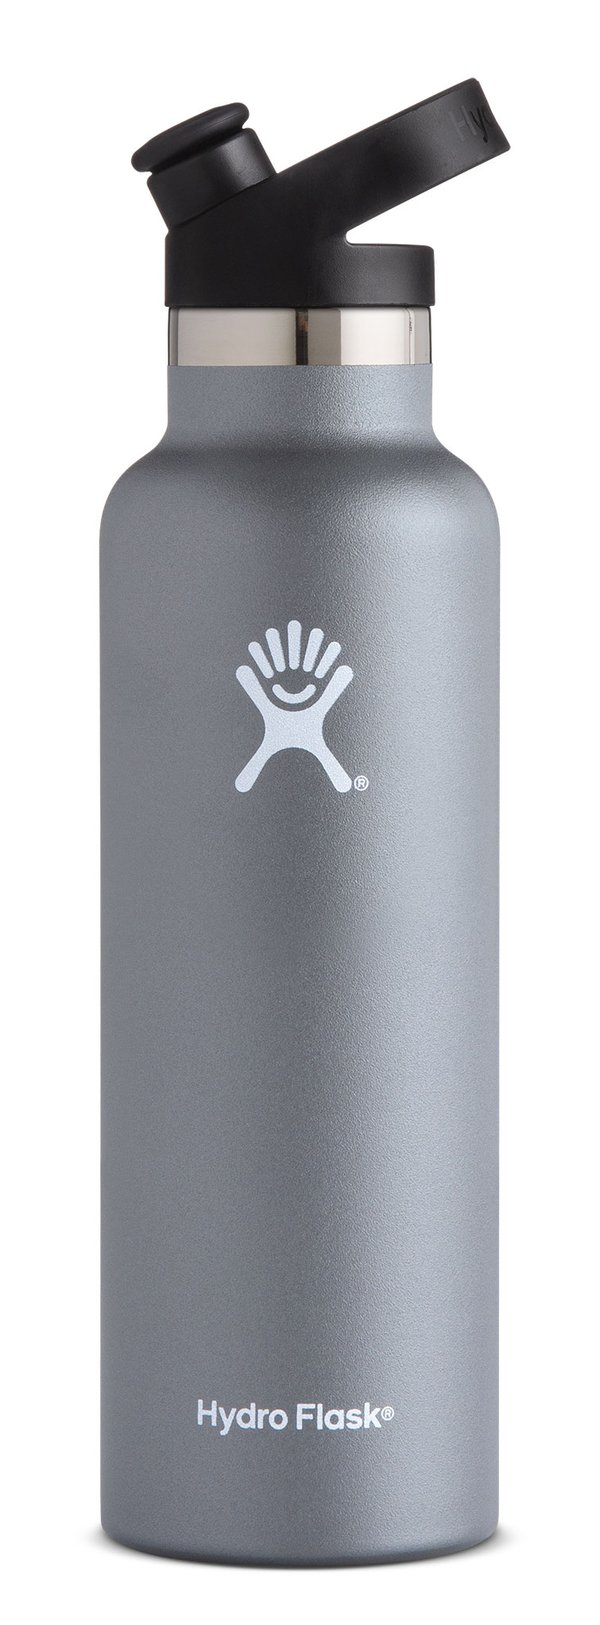 Hydro-Flask-21-oz-Standard-Mouth-with-Sport-Cap-Graphite.jpg